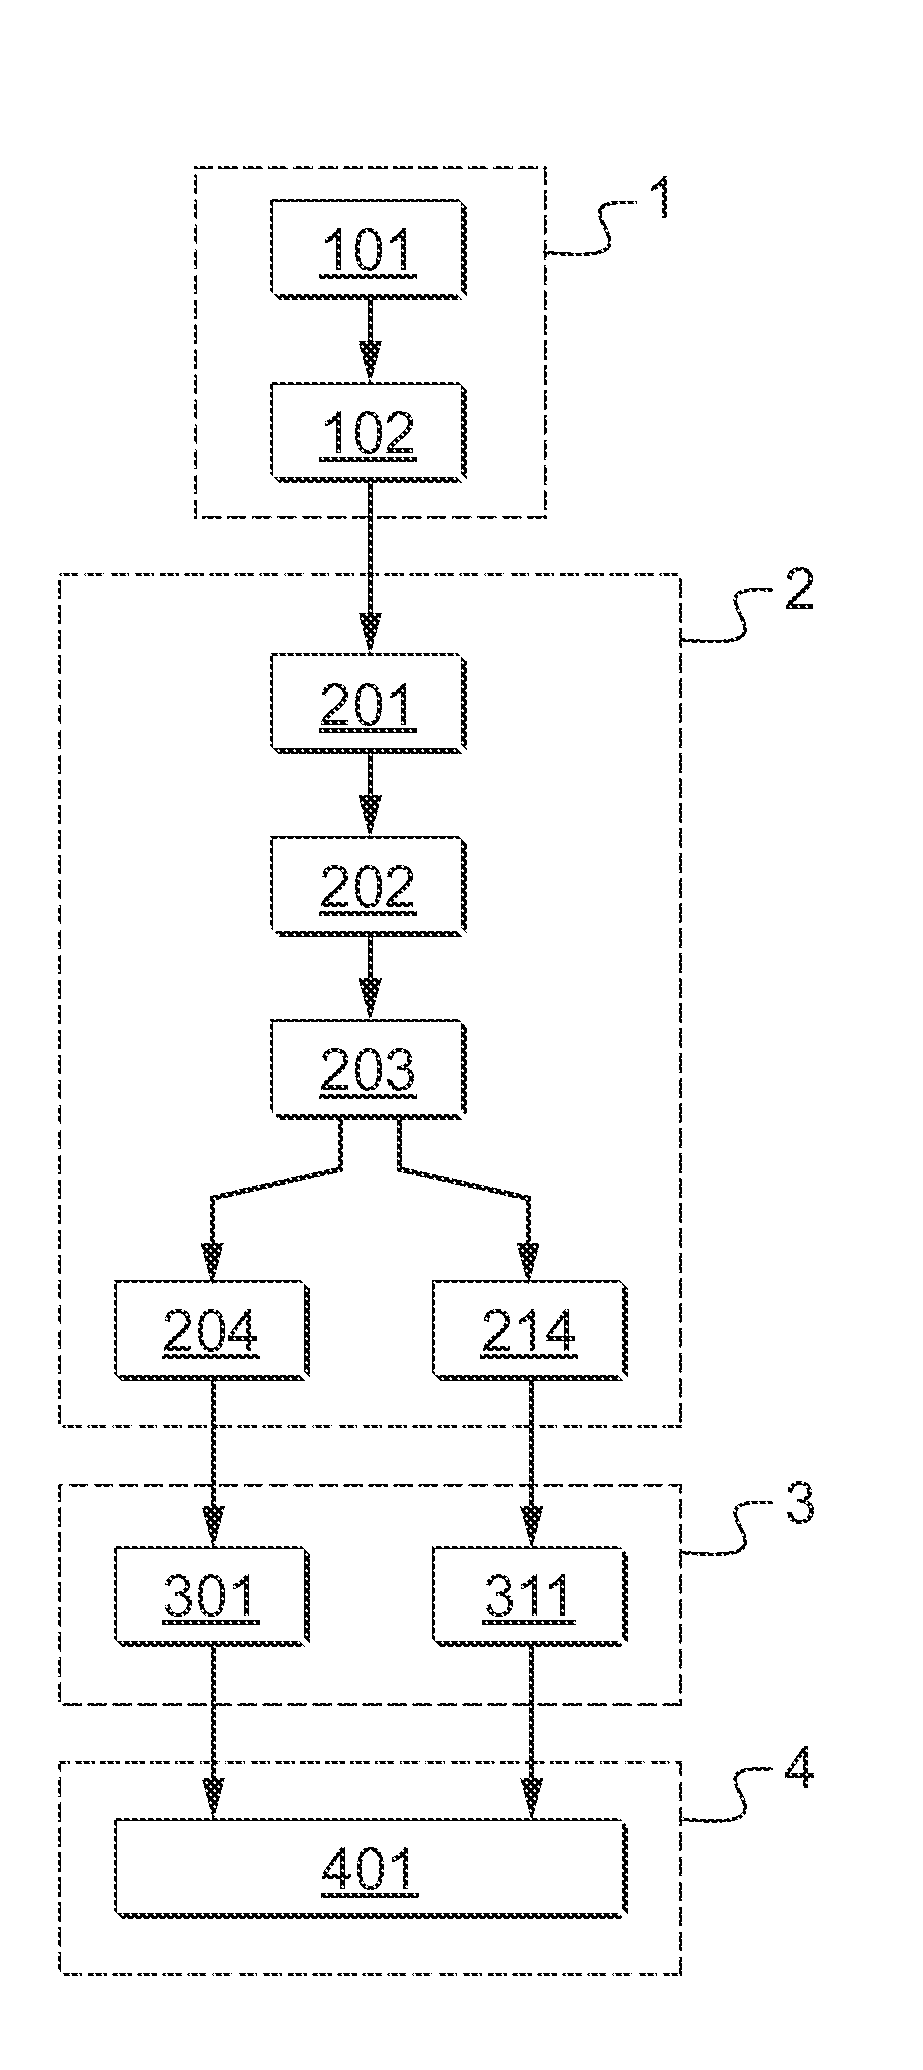 Method of detecting defects of a rolling bearing by vibration analysis